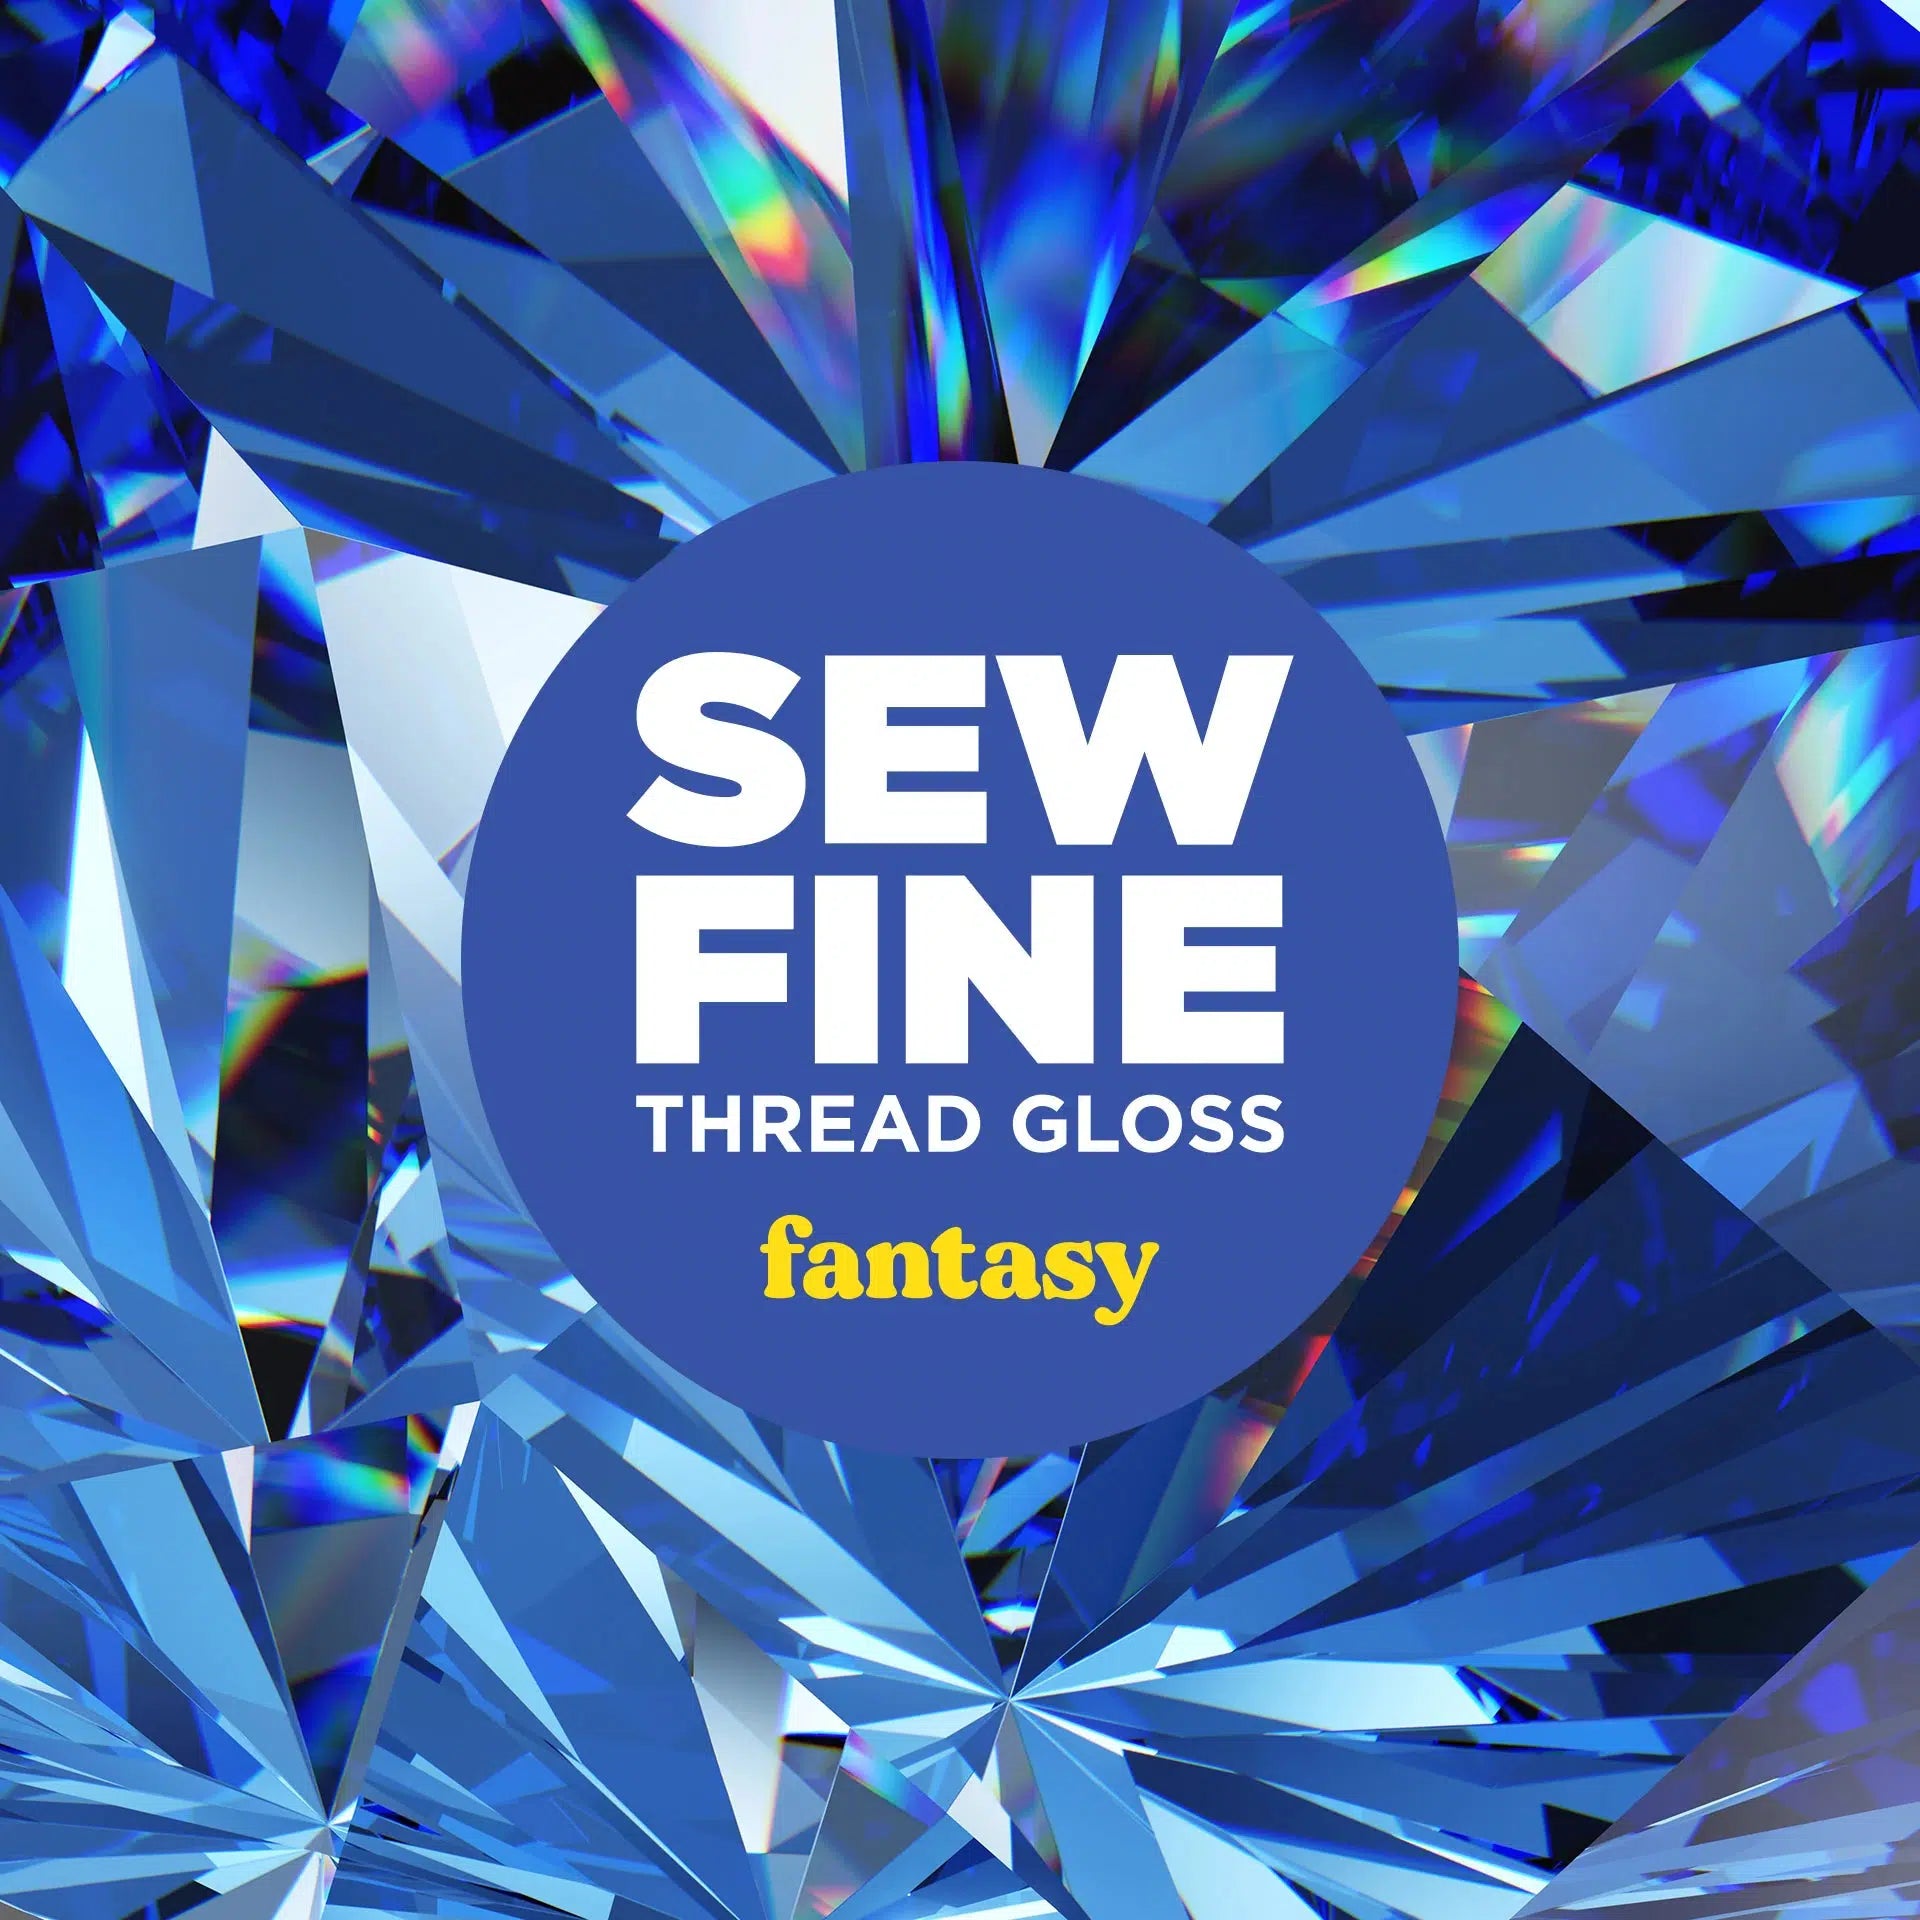 Sew Fine-Sew Fine Thread Gloss: Fantasy-sewing notion-gather here online